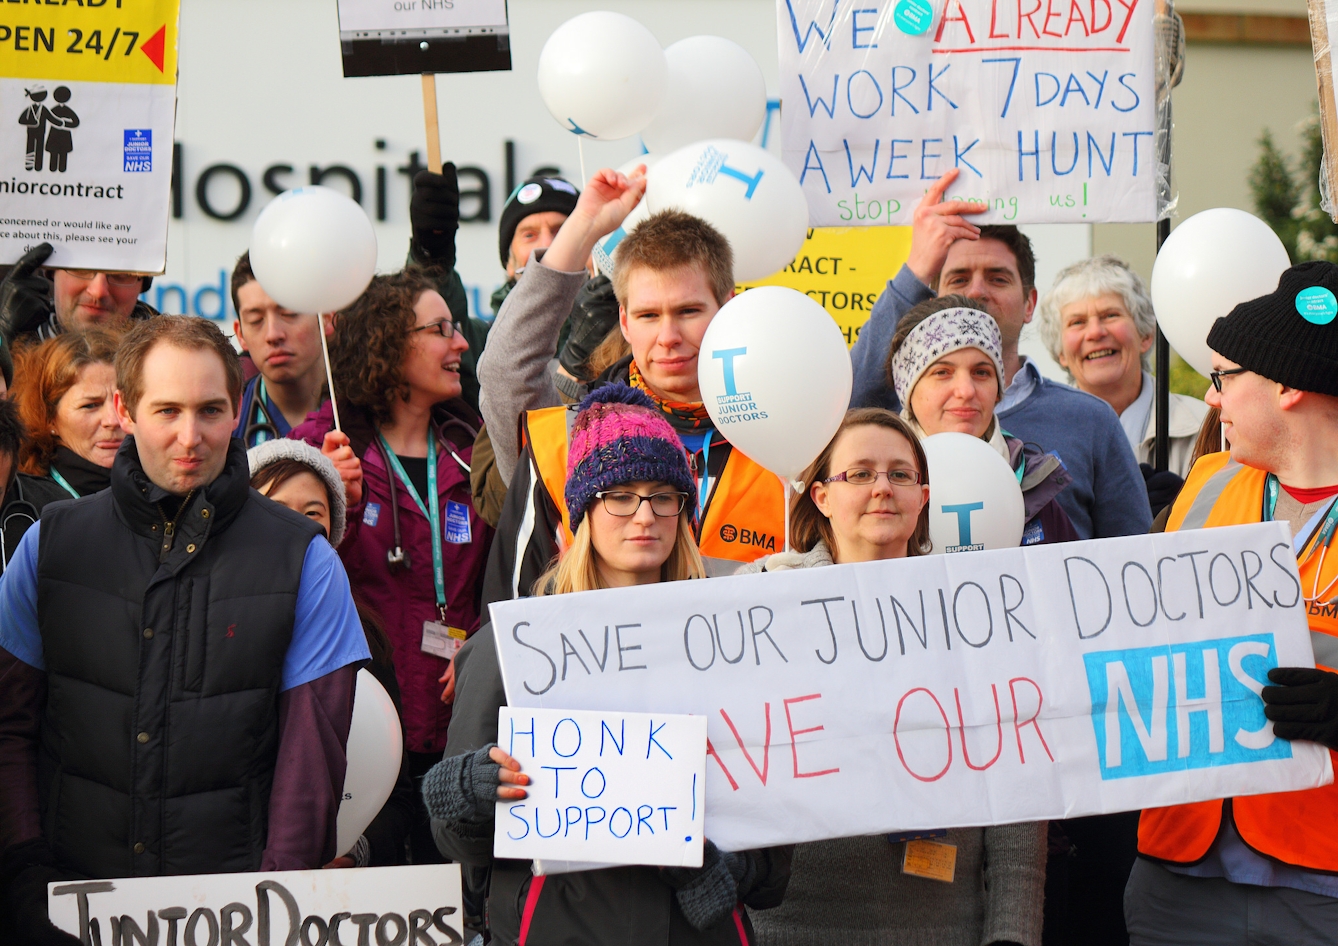 Colour photograph of a group of people on strike. They wear coats, gloves and hats, and some wear high-visibility jackets that have "BMA" printed on them. Placards and banners include "We already work 7 days a week Hunt" and "Save our junior doctors. Save our NHS."